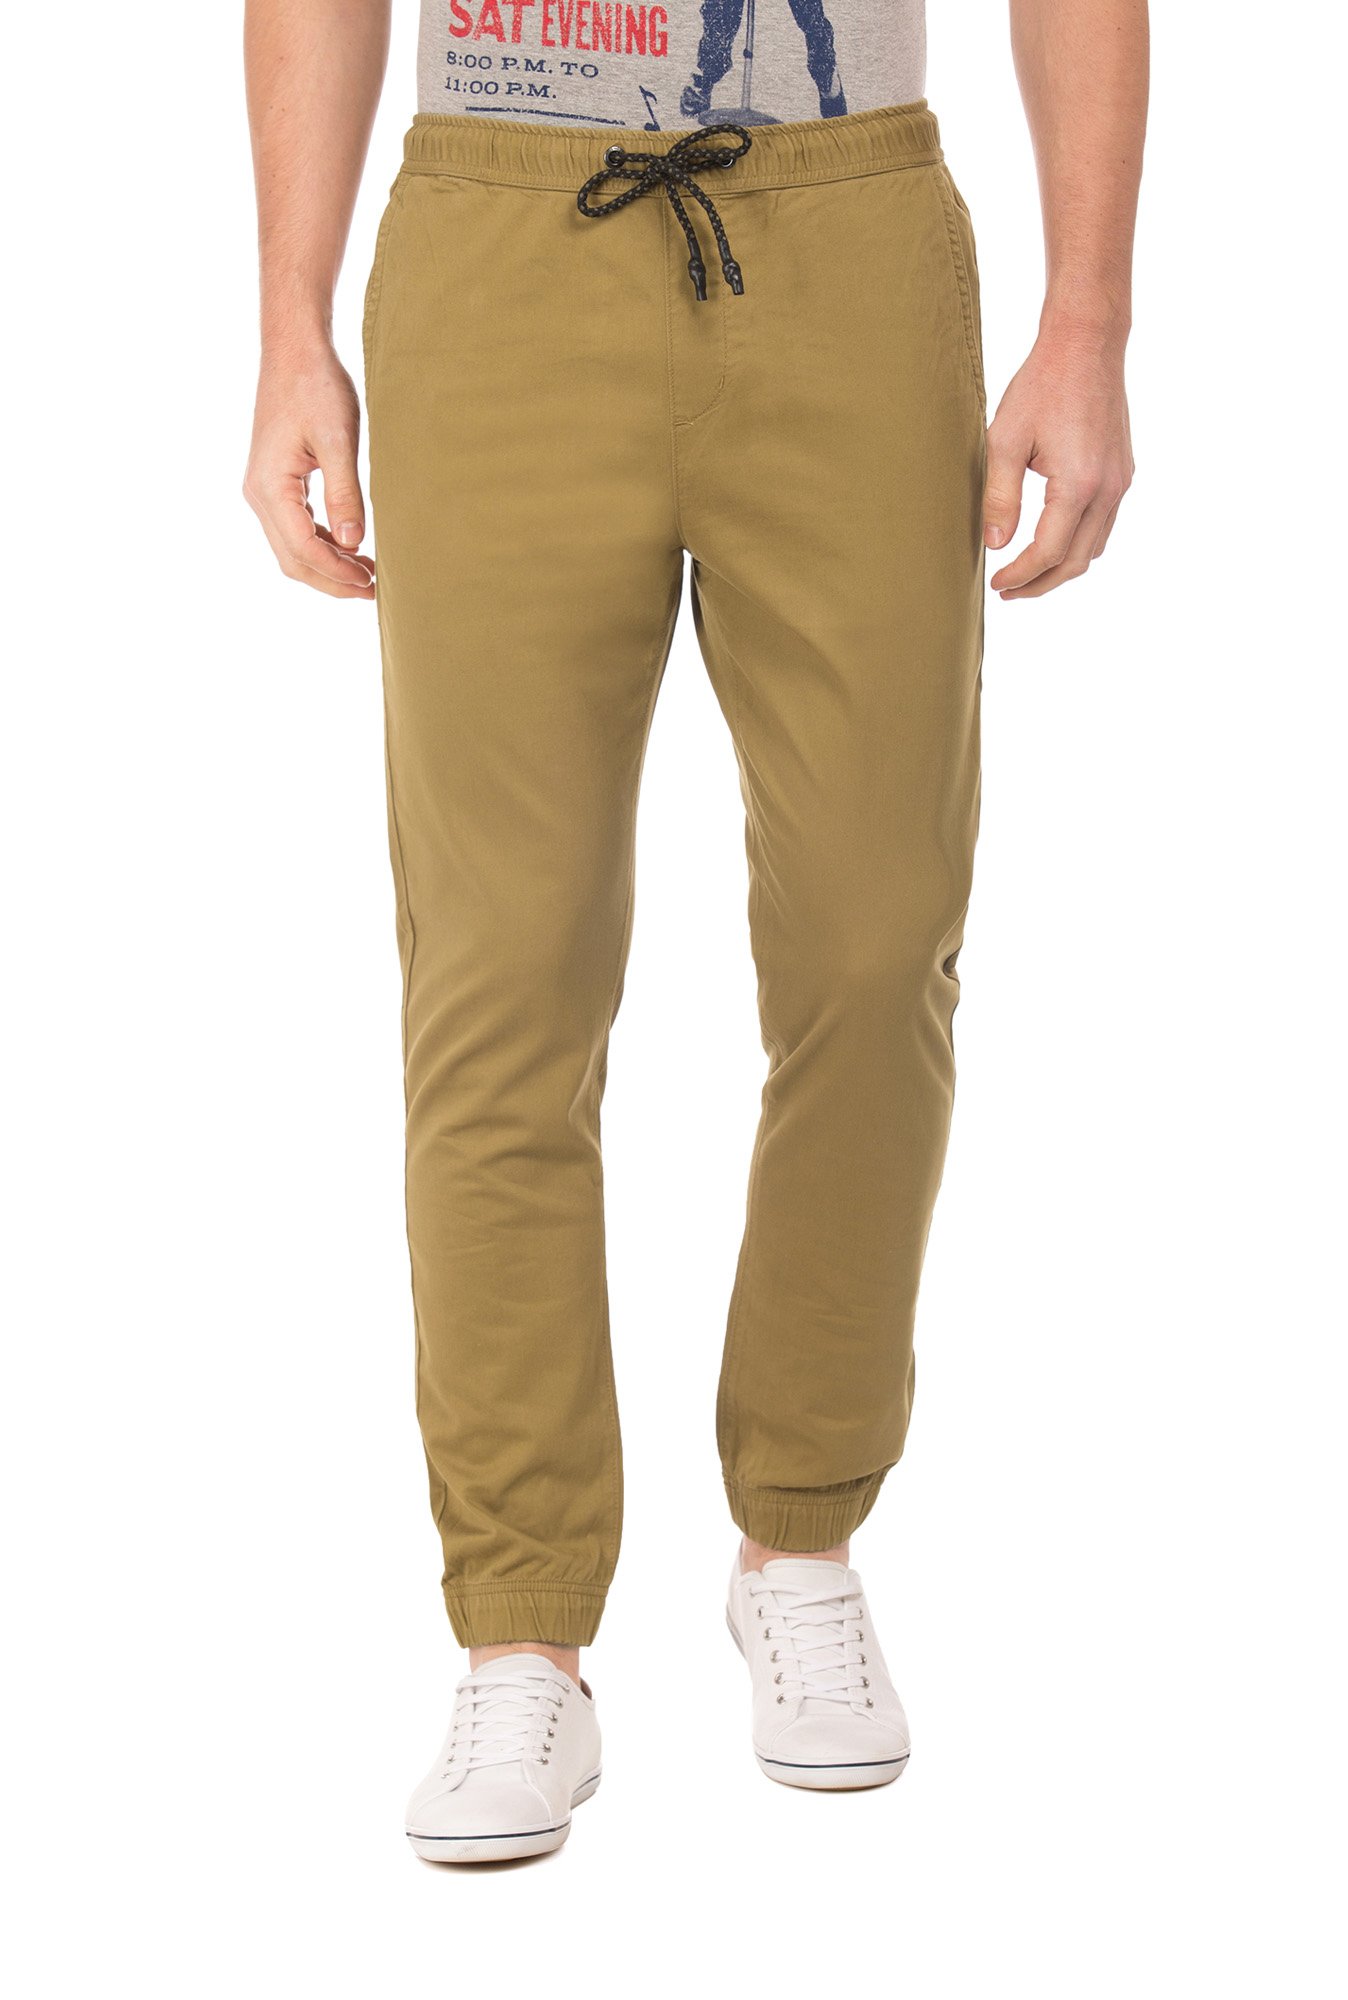 Dockers Relaxed Fit Comfort Stretch Pleated Cuffed Khaki Pants NewRet  58  Full On Cinema